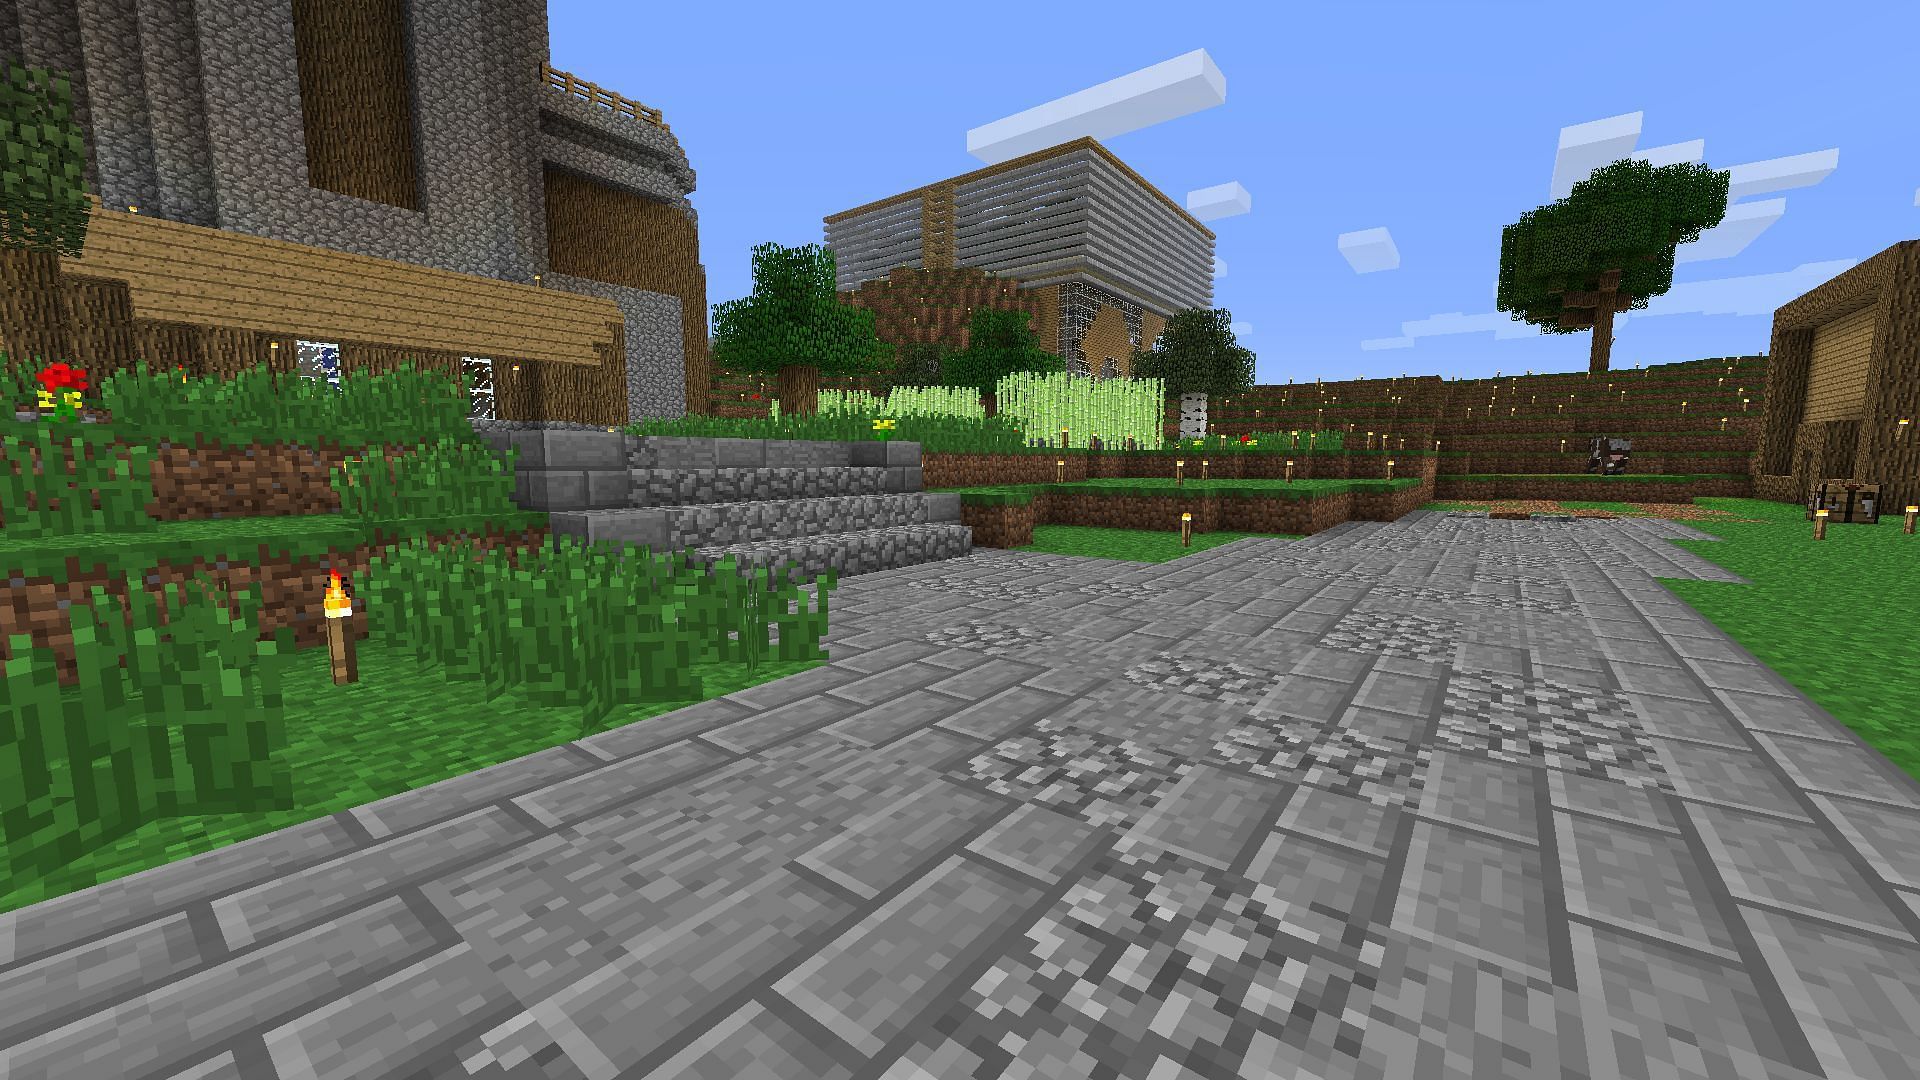 This Minecraft floor pattern is one that has stood the test of time (Image via Mojang)